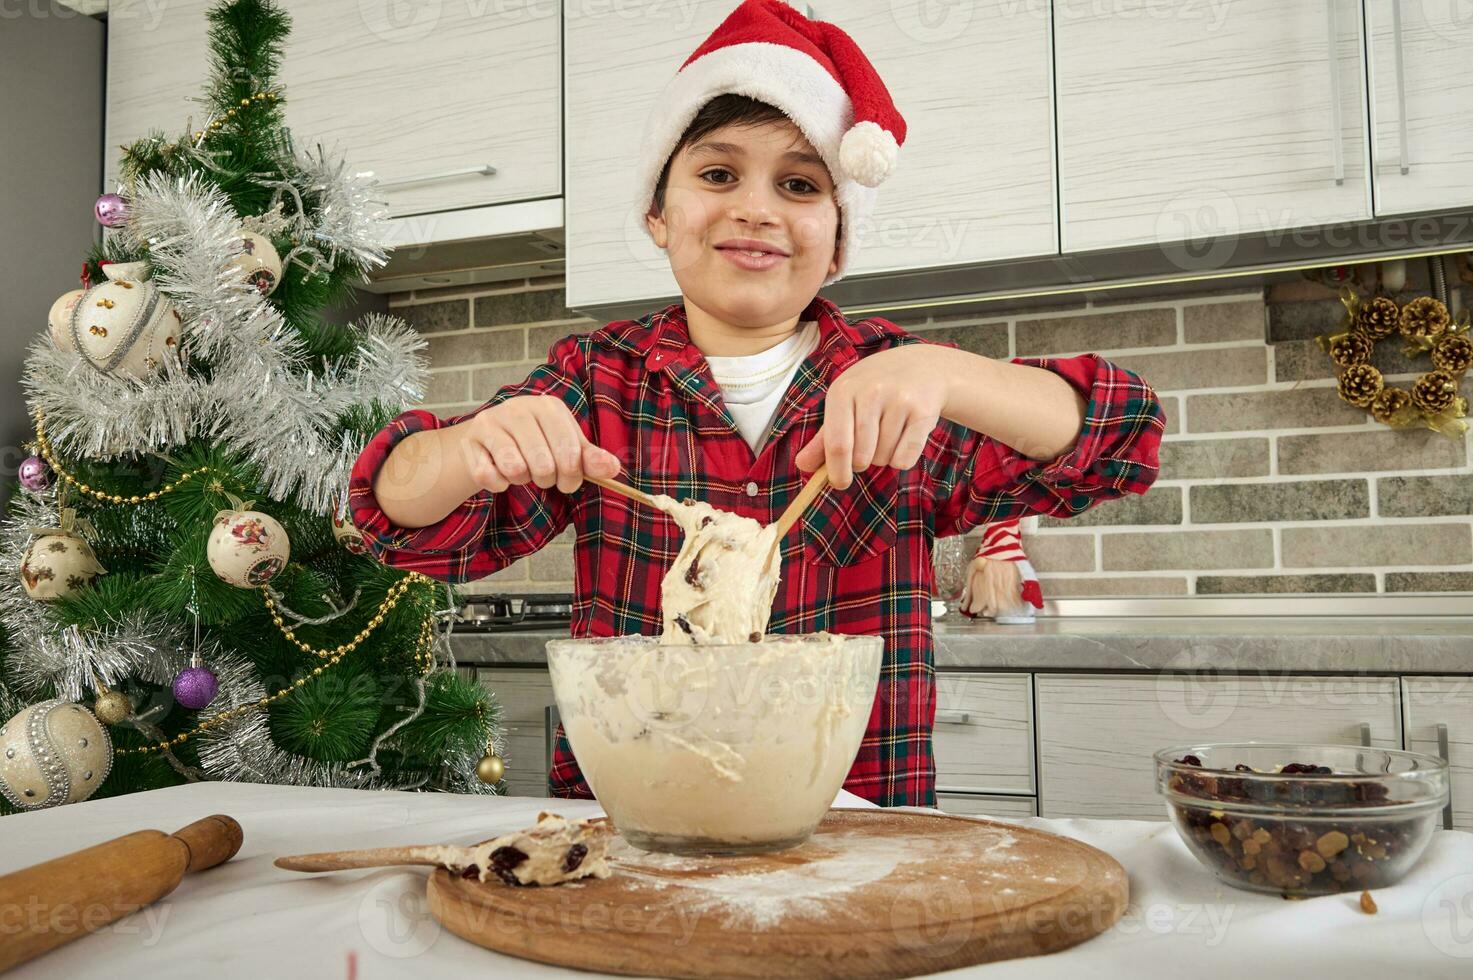 Handsome preadolescent Caucasian boy, adorable kid chef blogger in Santa hat kneading dough and showing it to the camera, cutely smiling with cheerful toothy smile. Christmas culinary concept photo